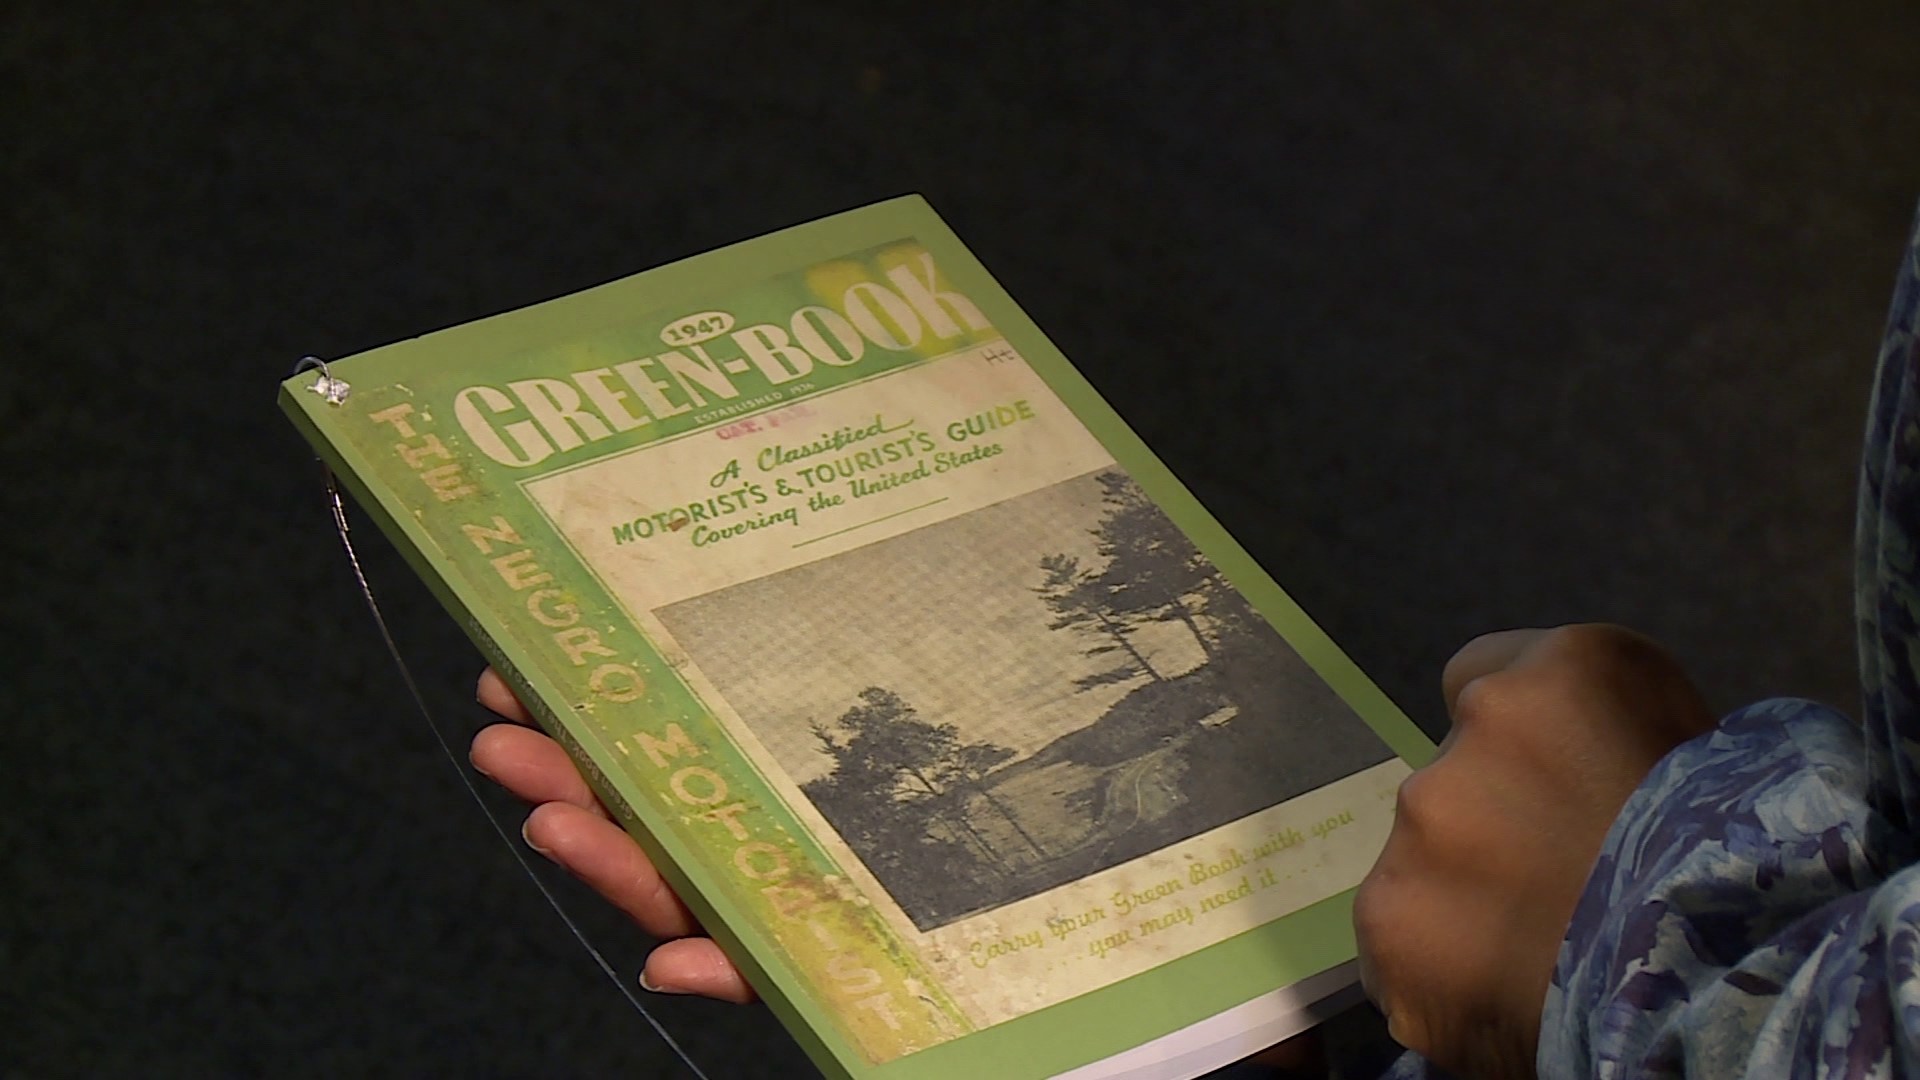 Tacoma, is latest stop for the "Negro Motorist Green Book", which brings to life what travel was really like for African-Americans during Jim Crow.  #k5evening